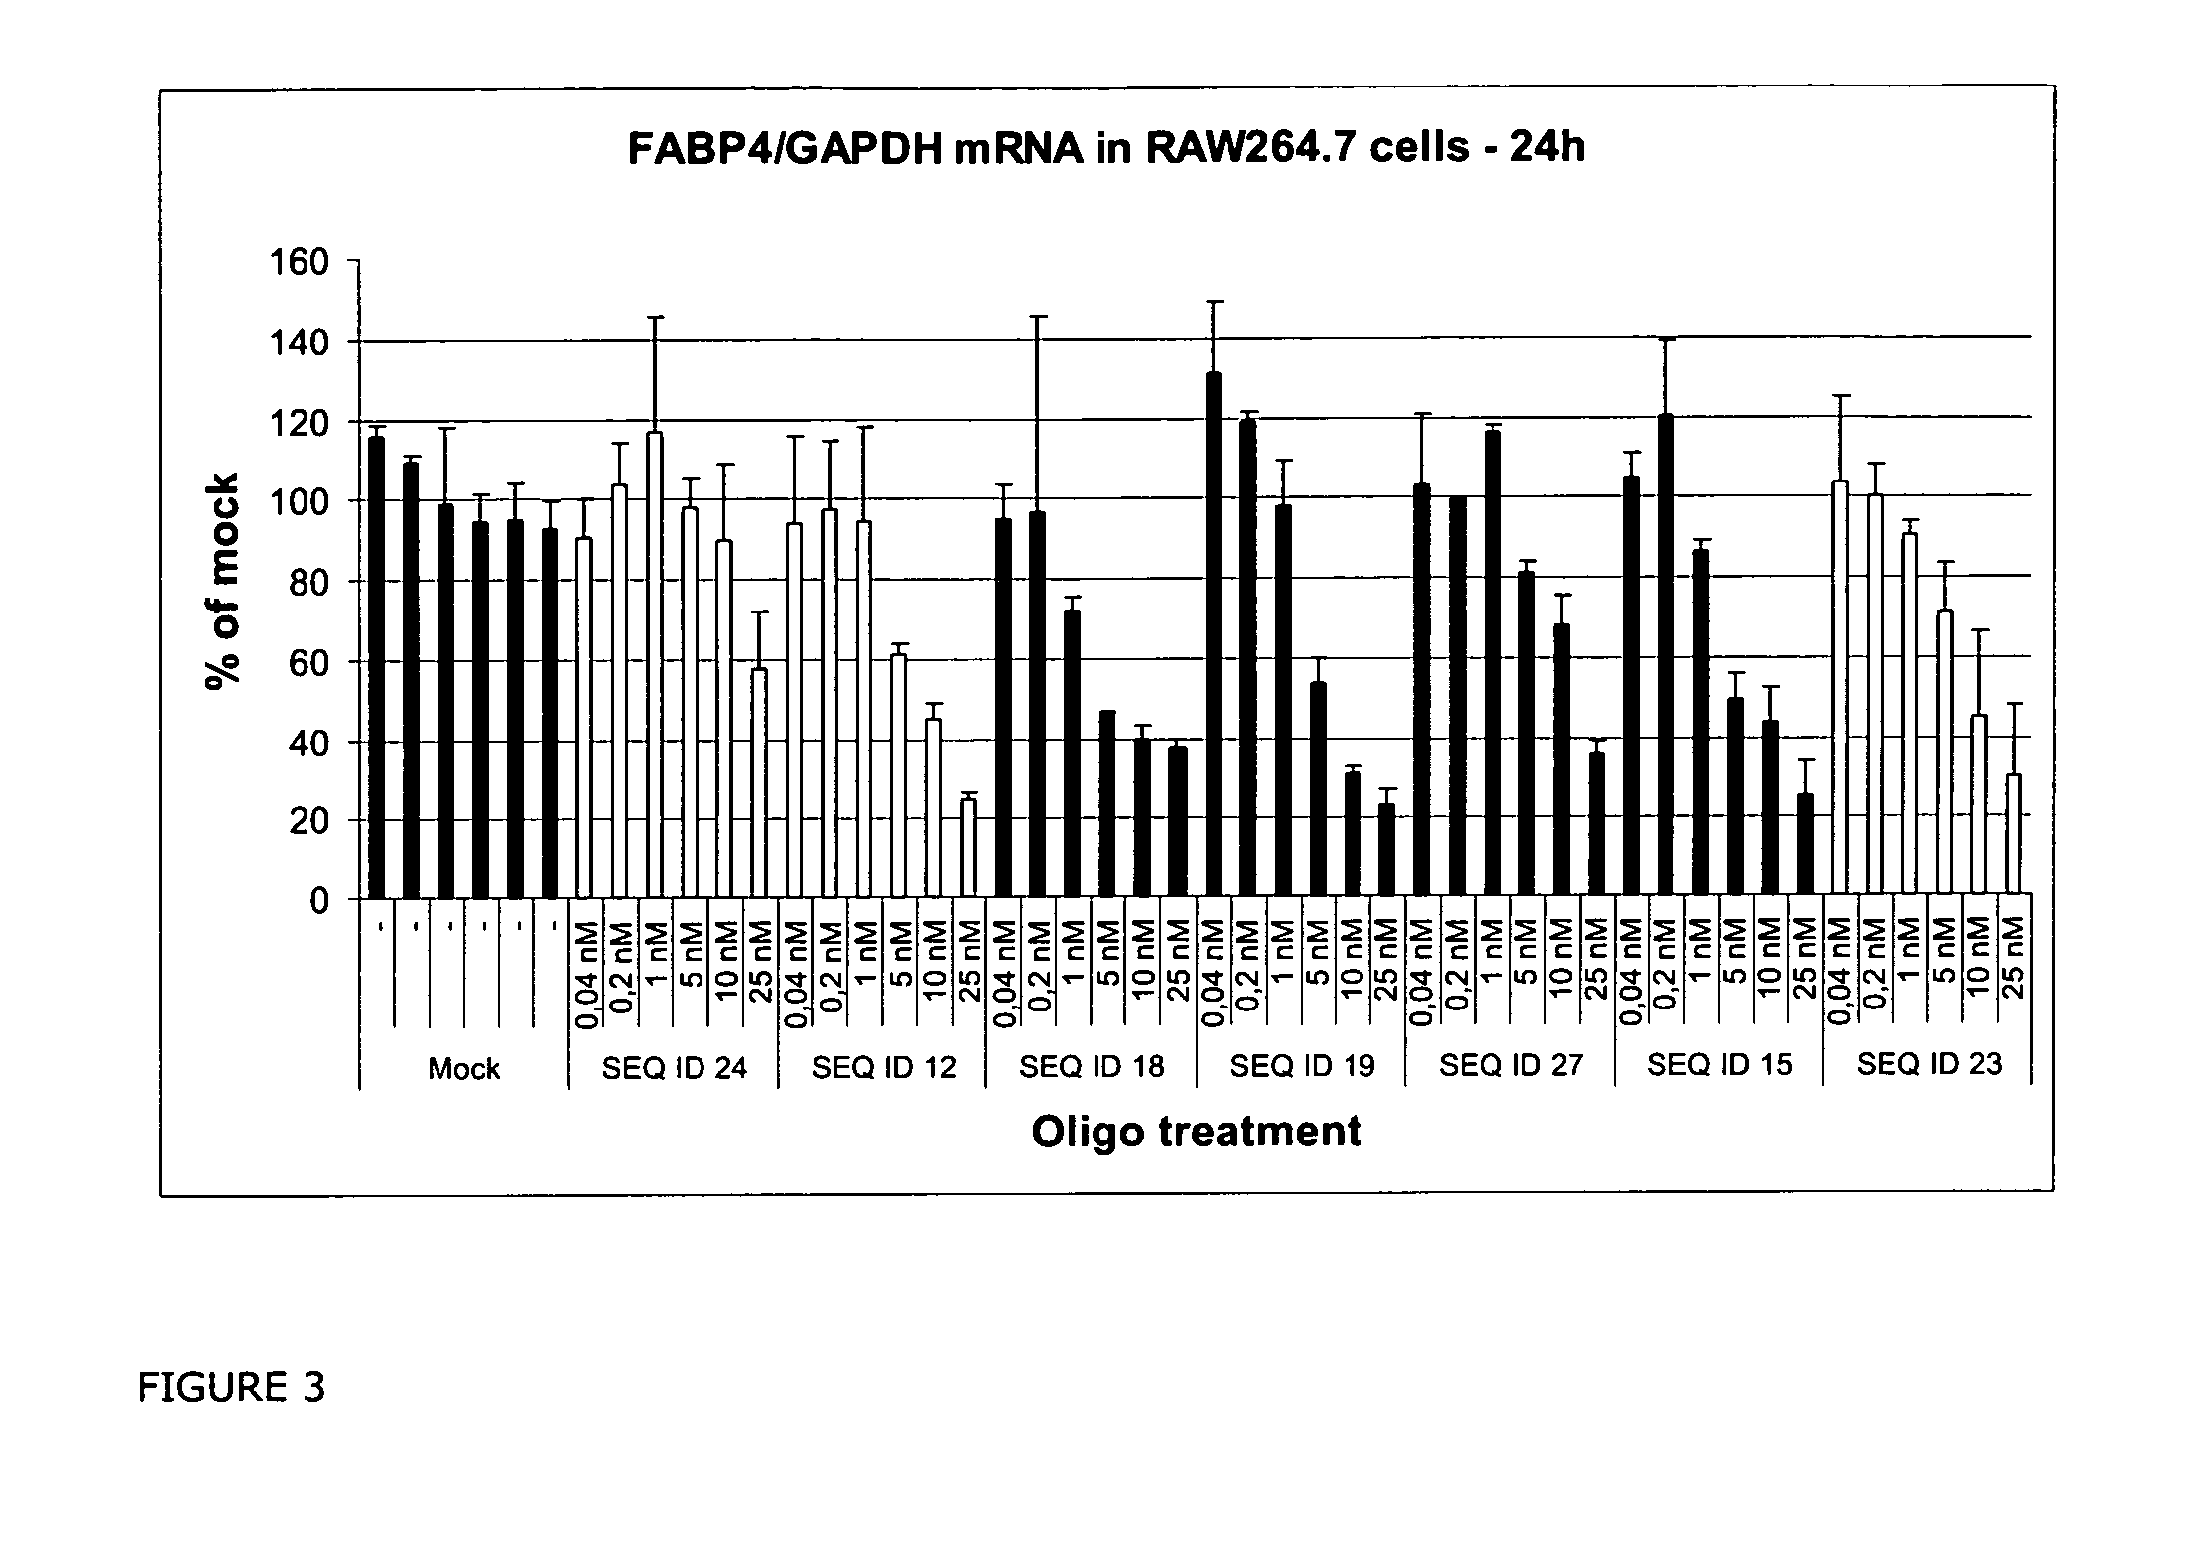 RNA Antagonist Compounds for the Modulation of FABP4/AP2